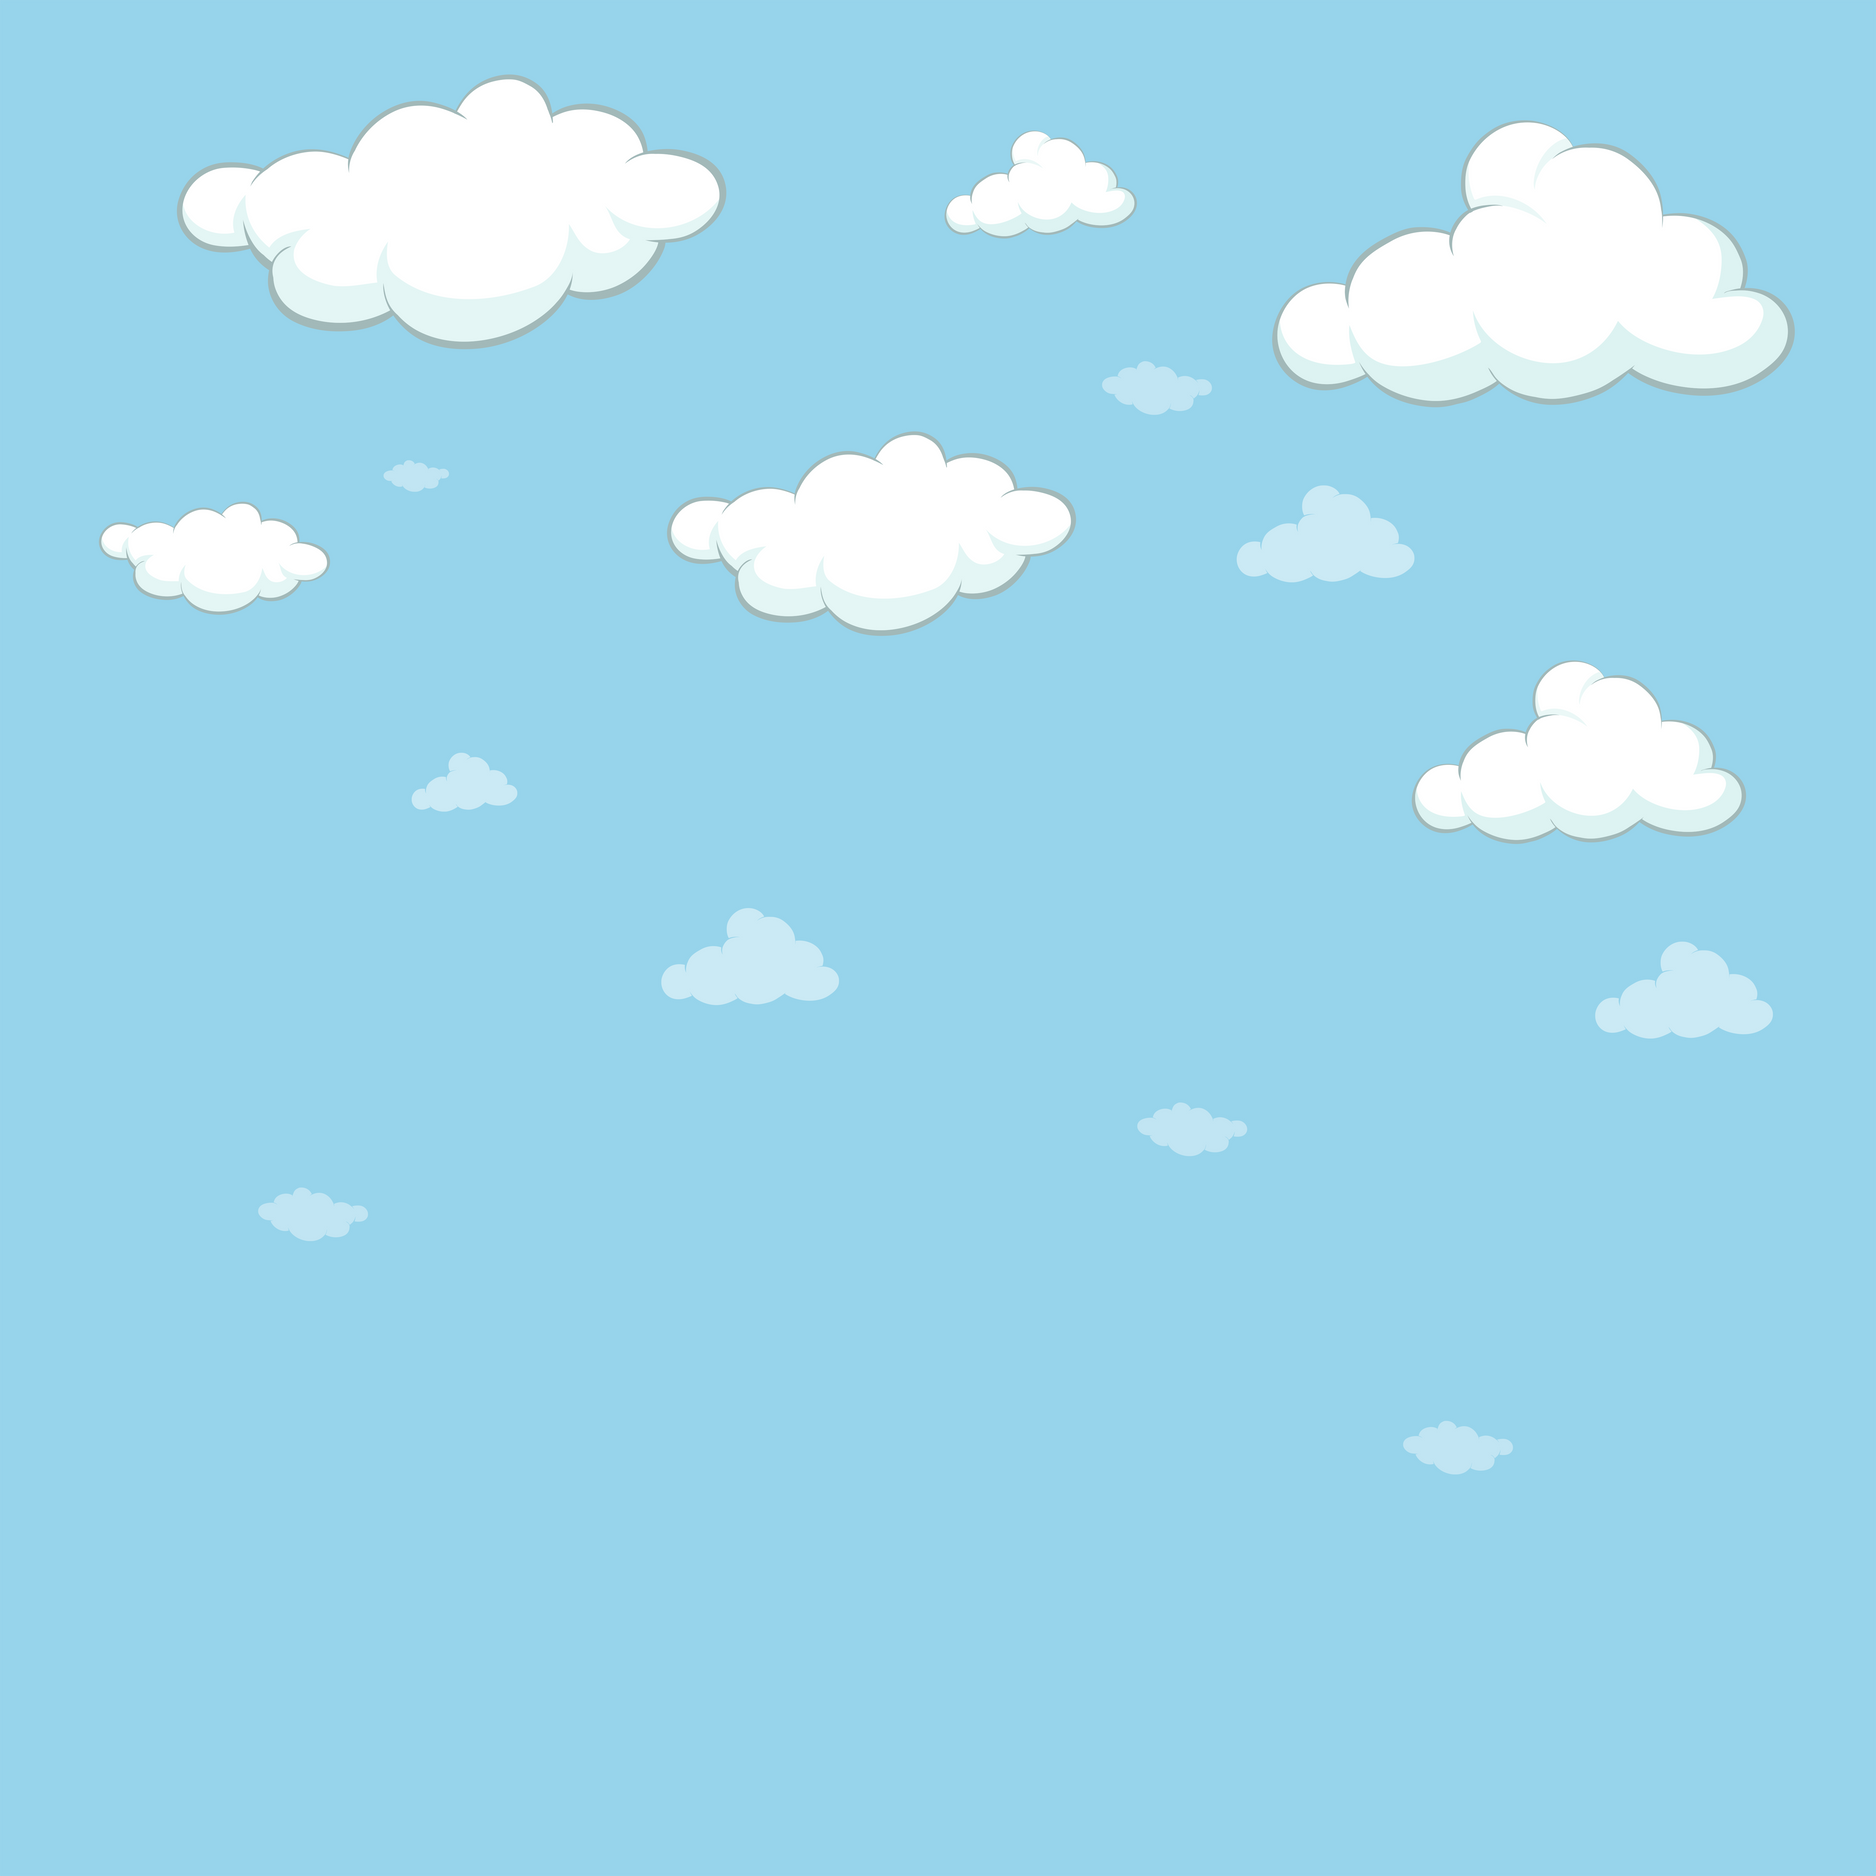 Background with Blue Sky